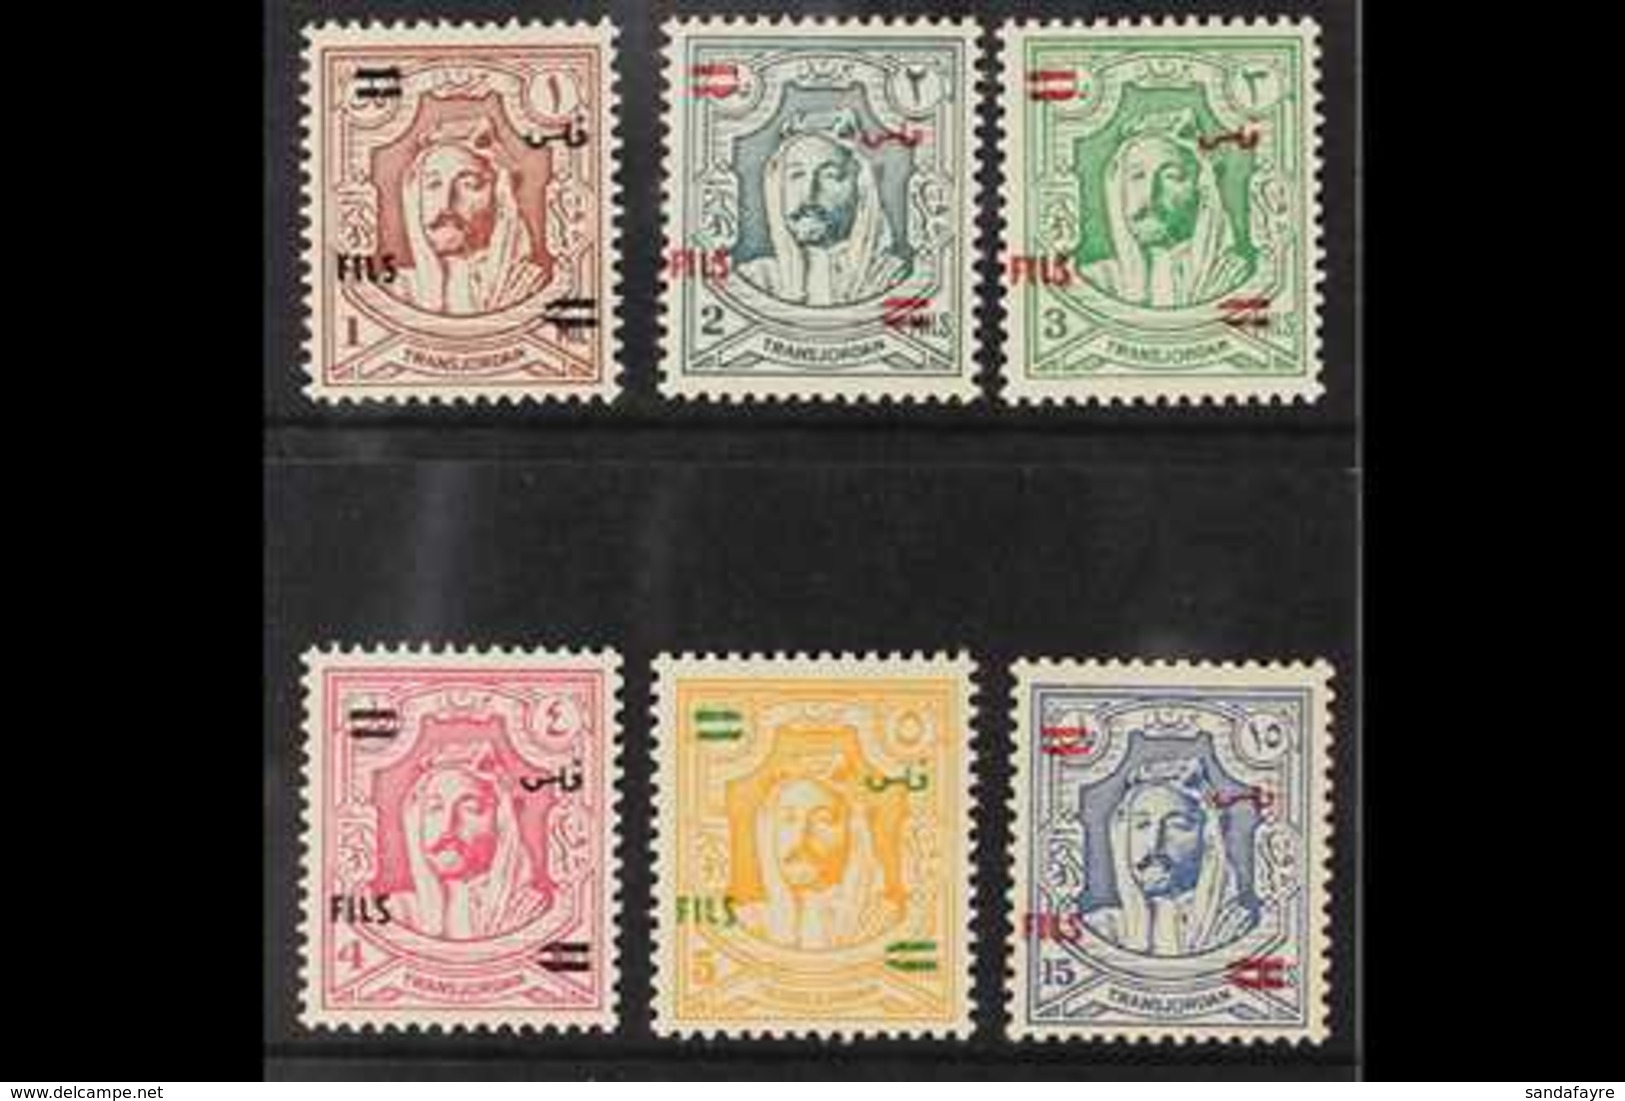 1952  Overprints On 1942 Litho Issues Complete Set, SG 307/12, Never Hinged Mint, Fresh. (6 Stamps) For More Images, Ple - Jordanie